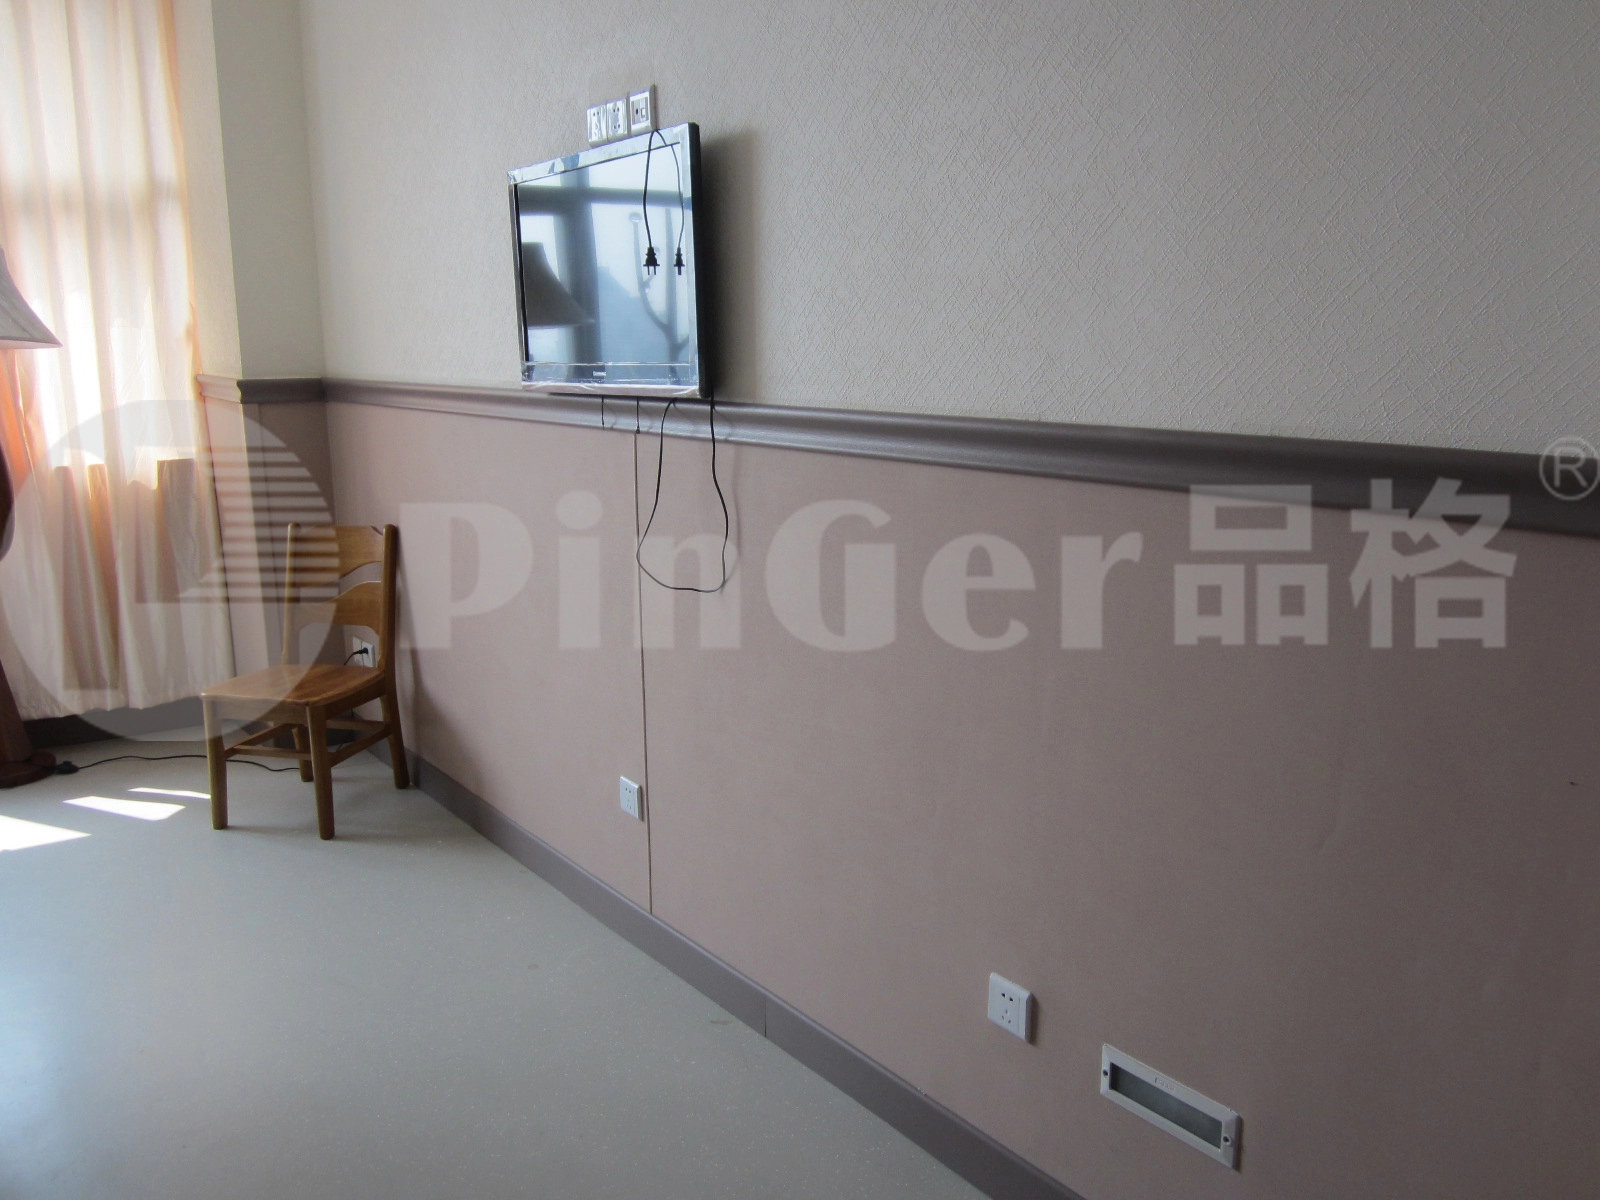 Chair rail system for wall protection and decoration